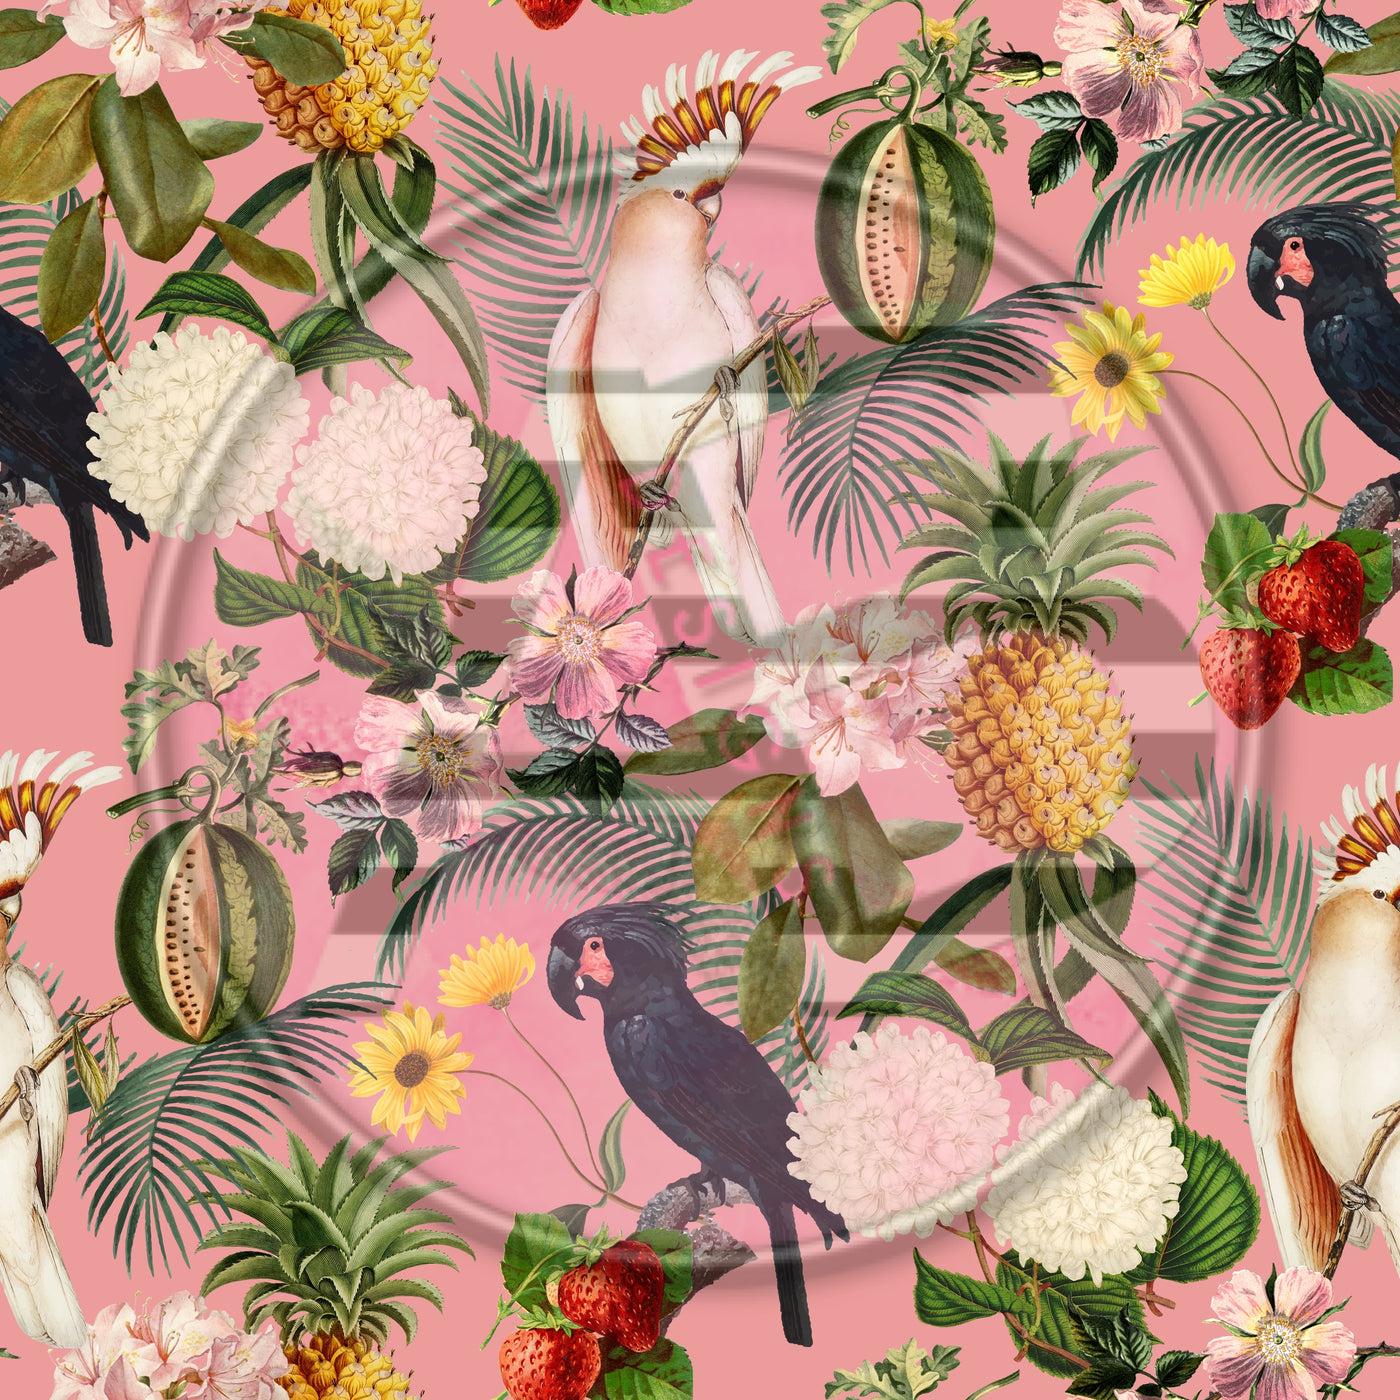 Adhesive Patterned Vinyl - Tropical 1762